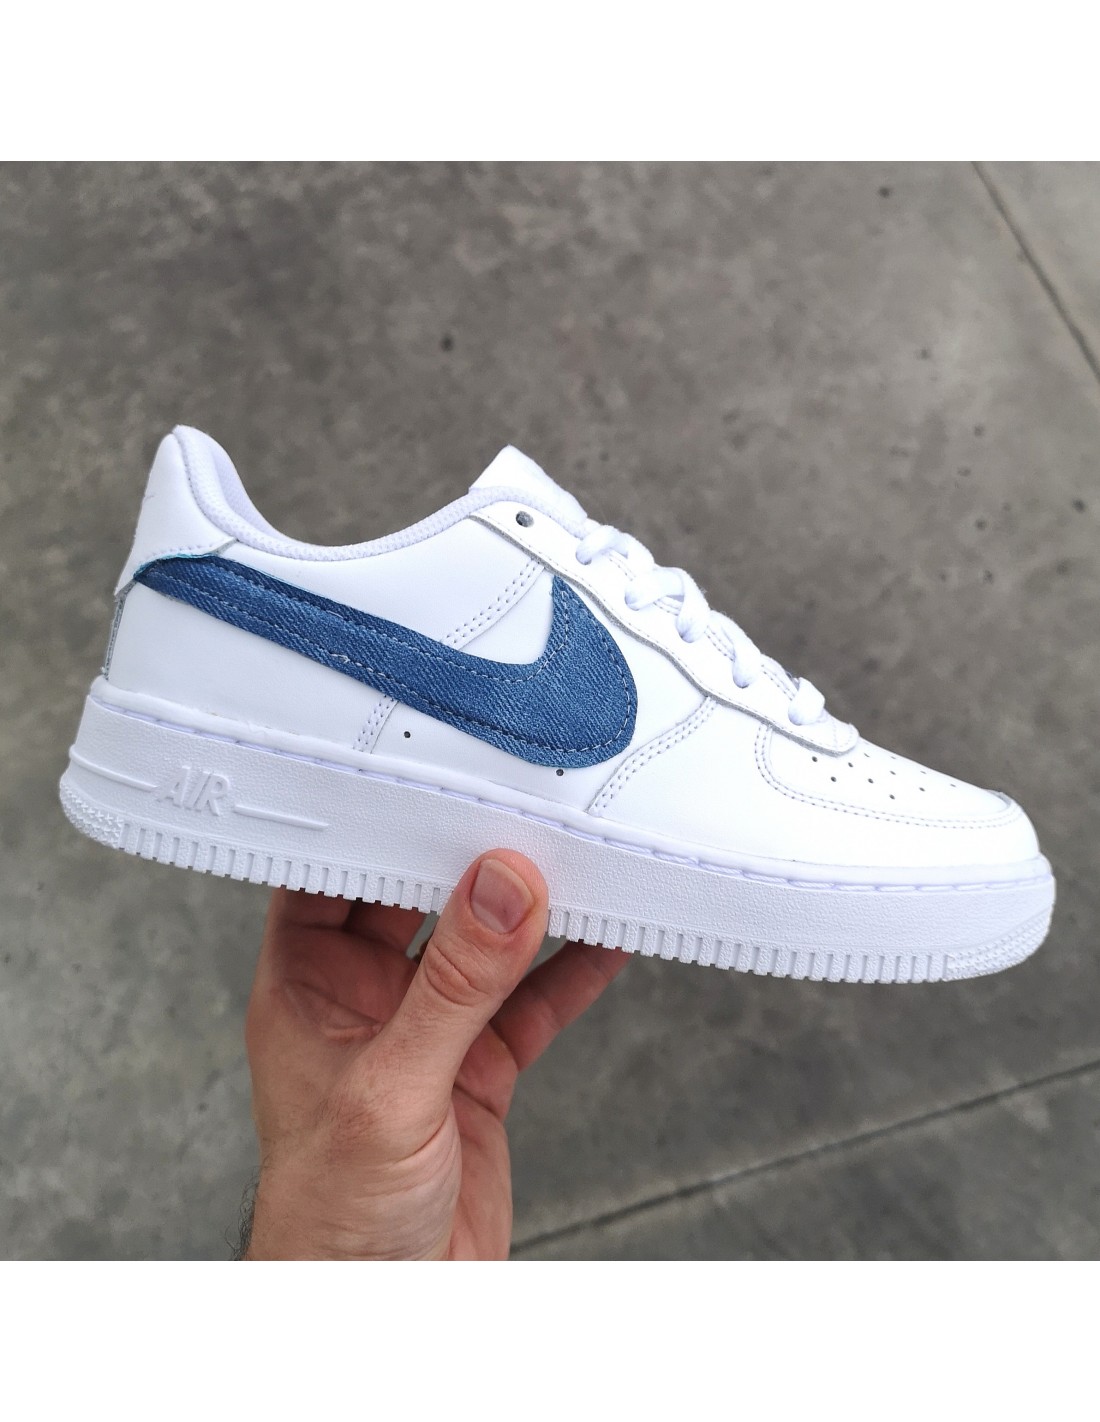 le air force one